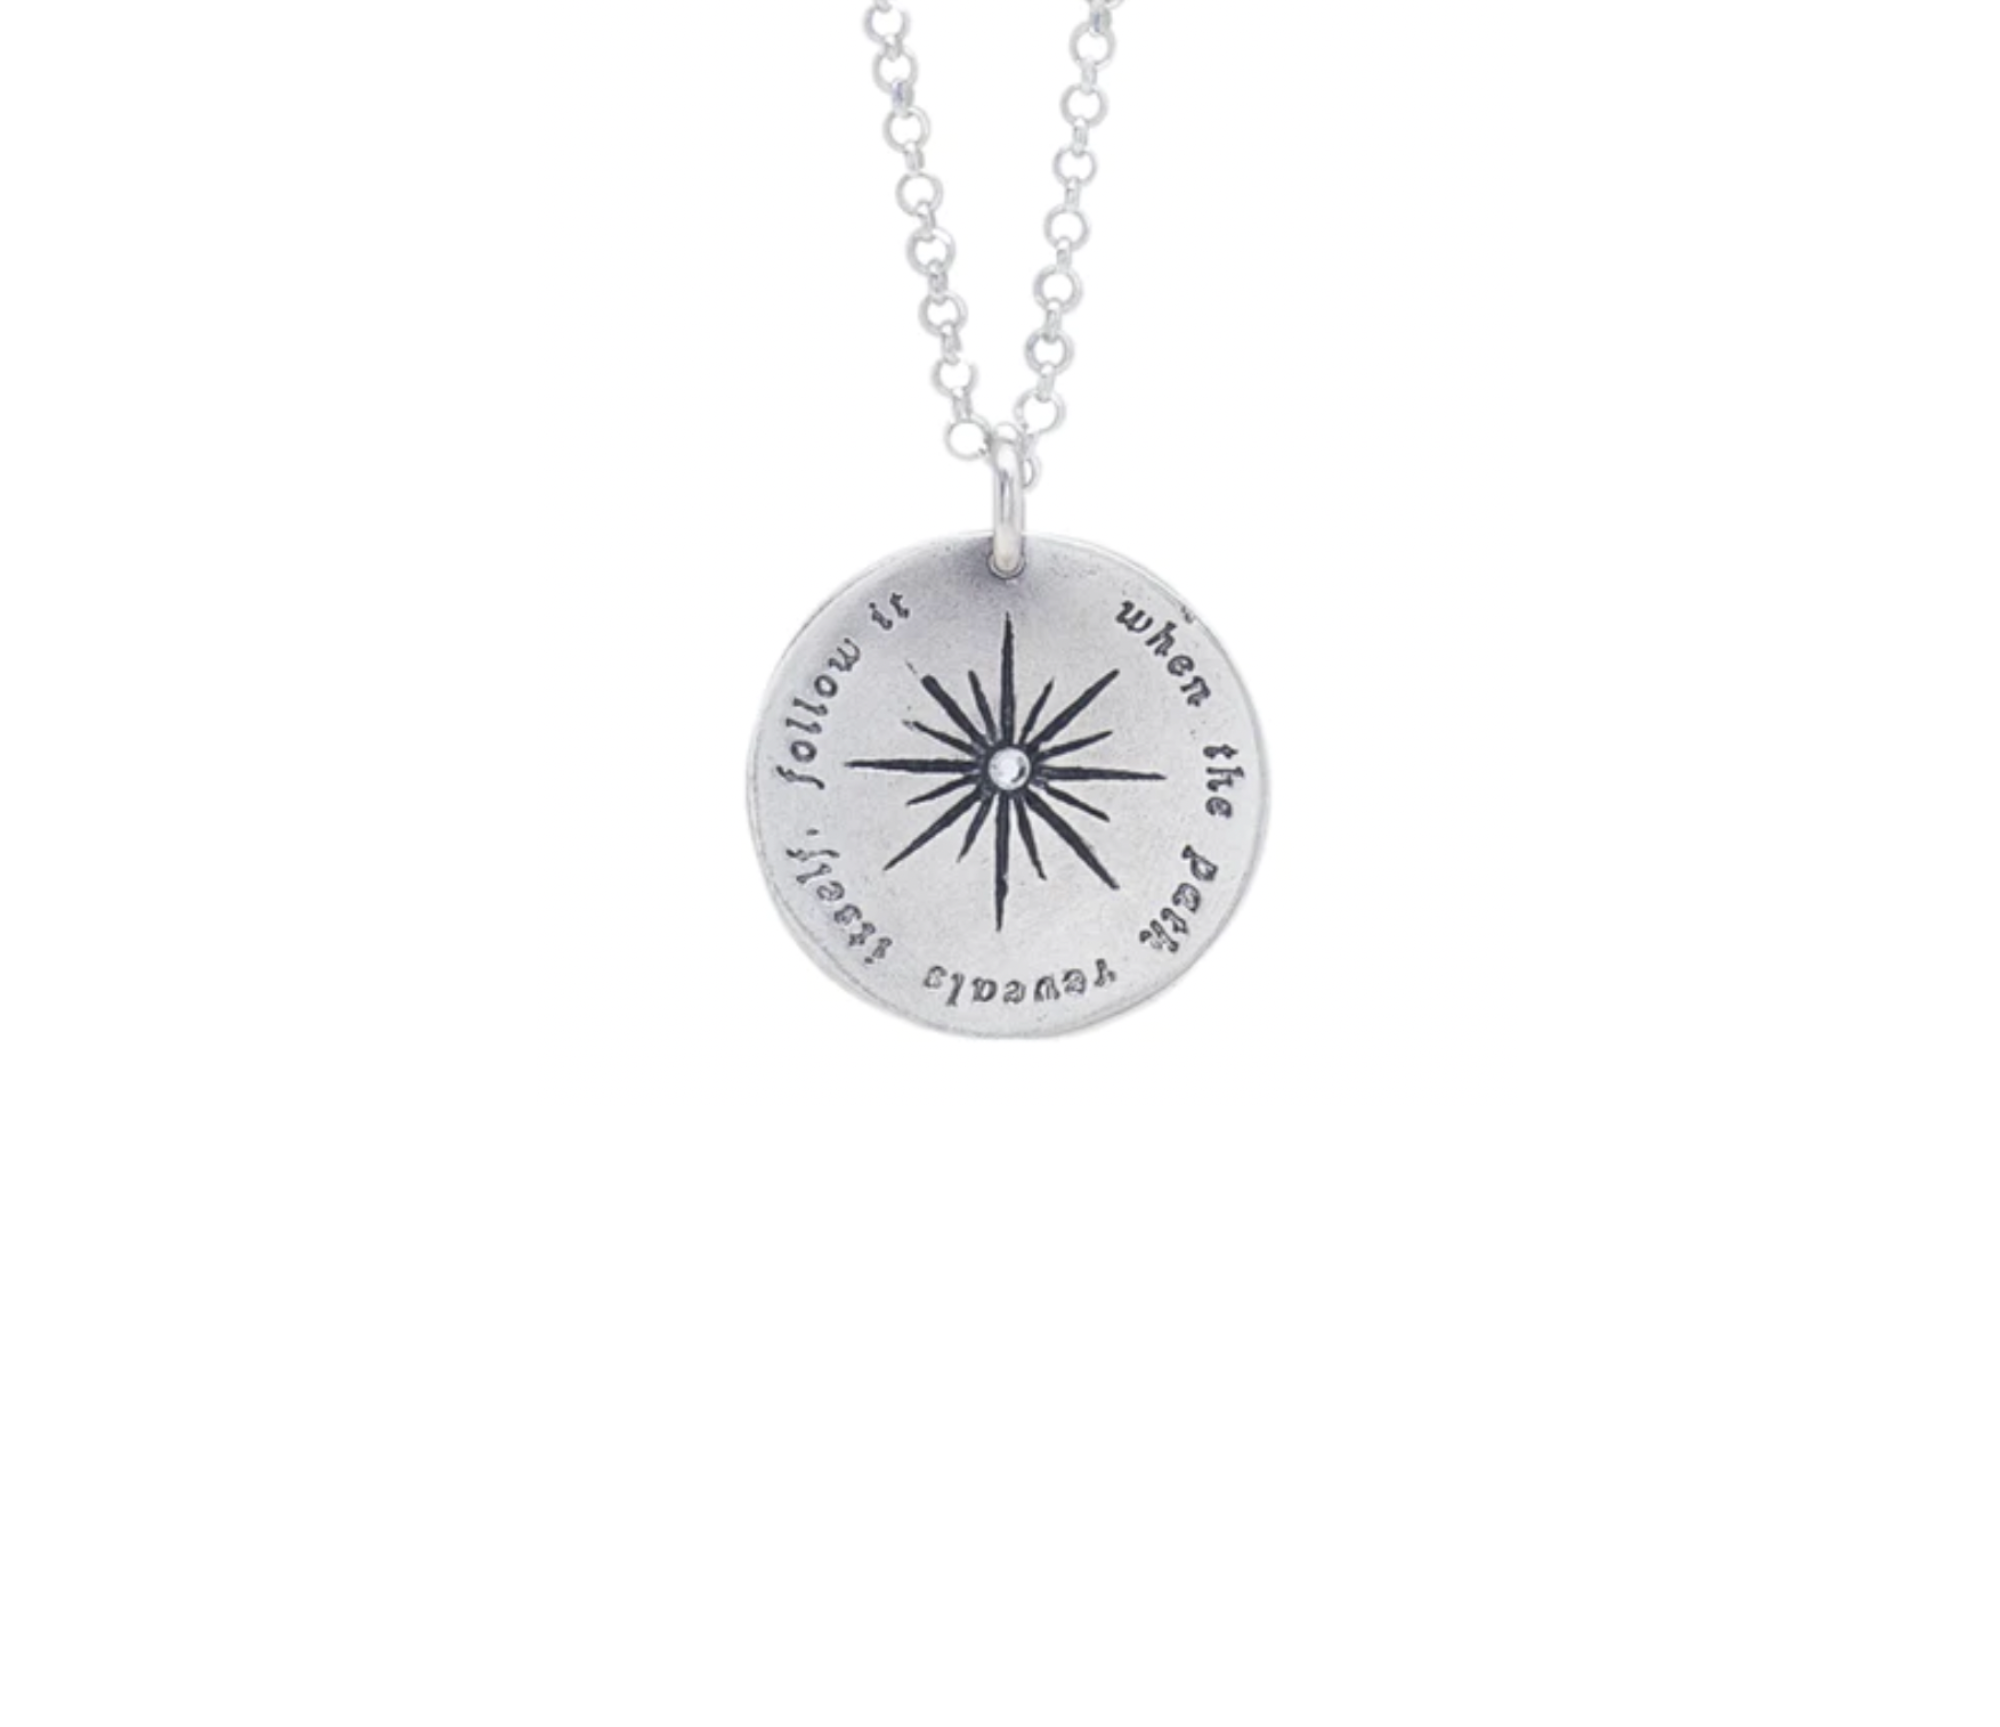 Cheryl Strayed - The Path Medallion Necklace, $119 at Waxing Poetic